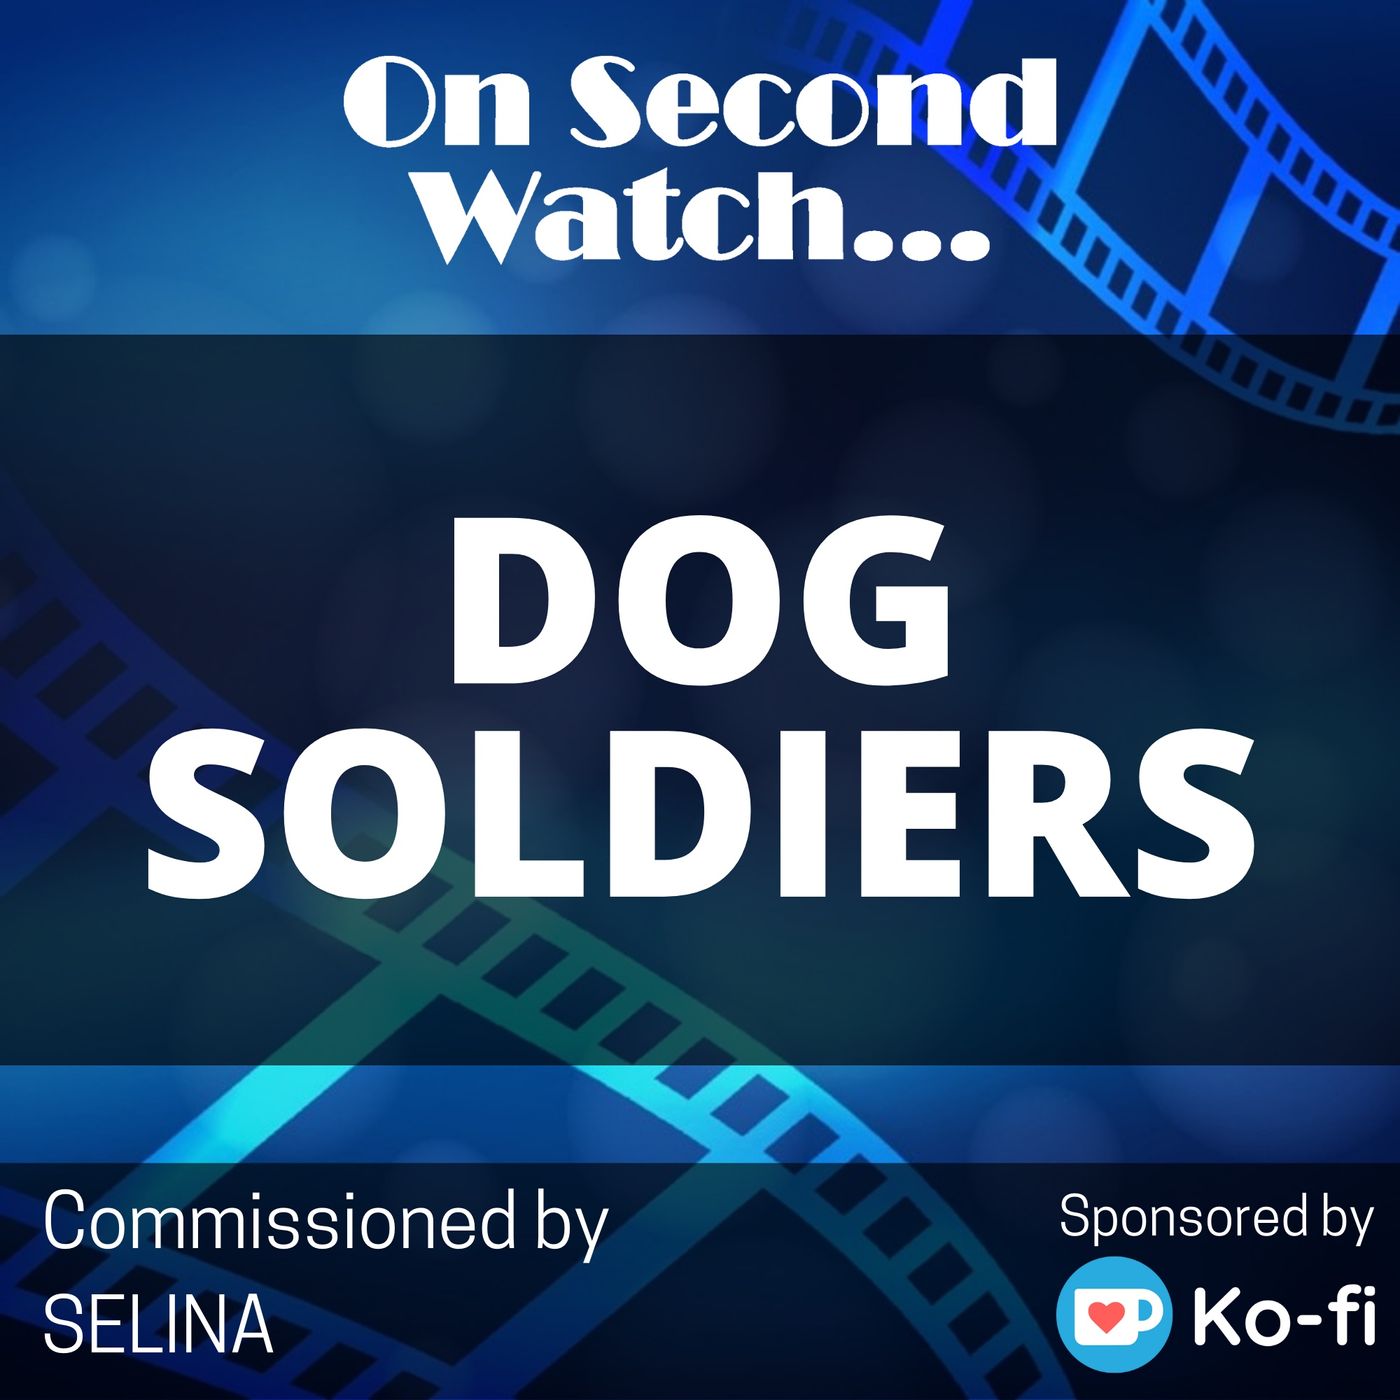 Dog Soldiers (2002) - ”My guts are out Coop!”